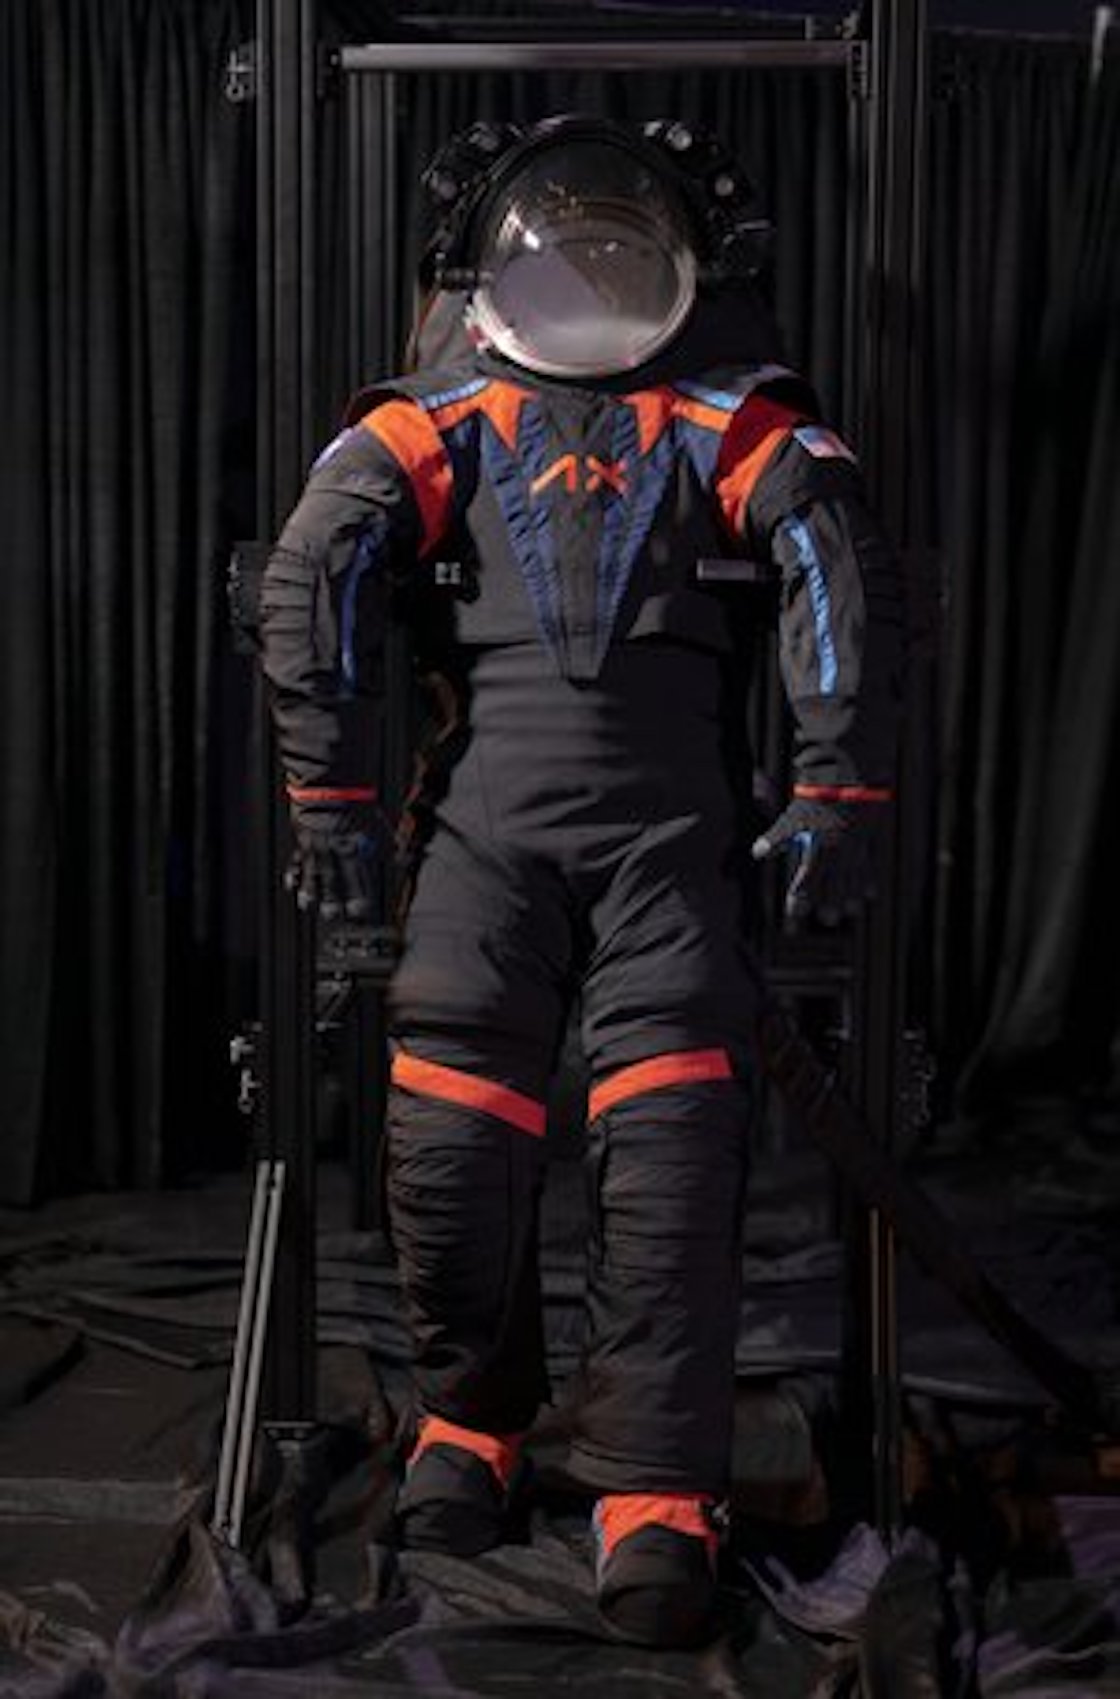 New spacesuit from Axiom Space for NASA.